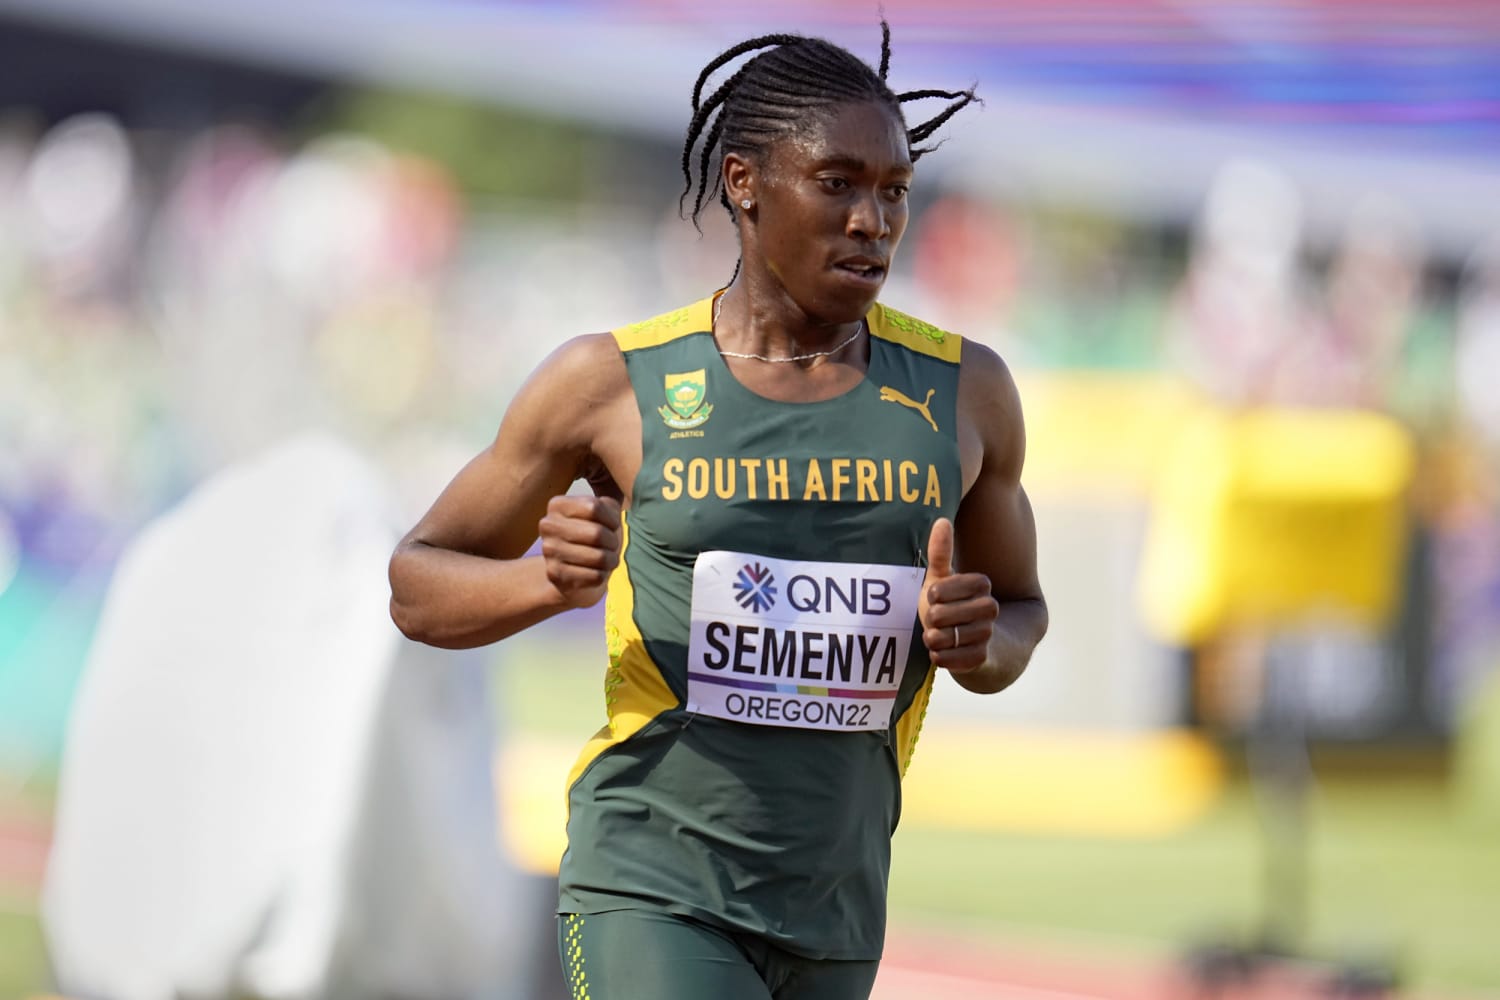 Olympic champion Caster Semenya wins appeal against testosterone rules in human rights court